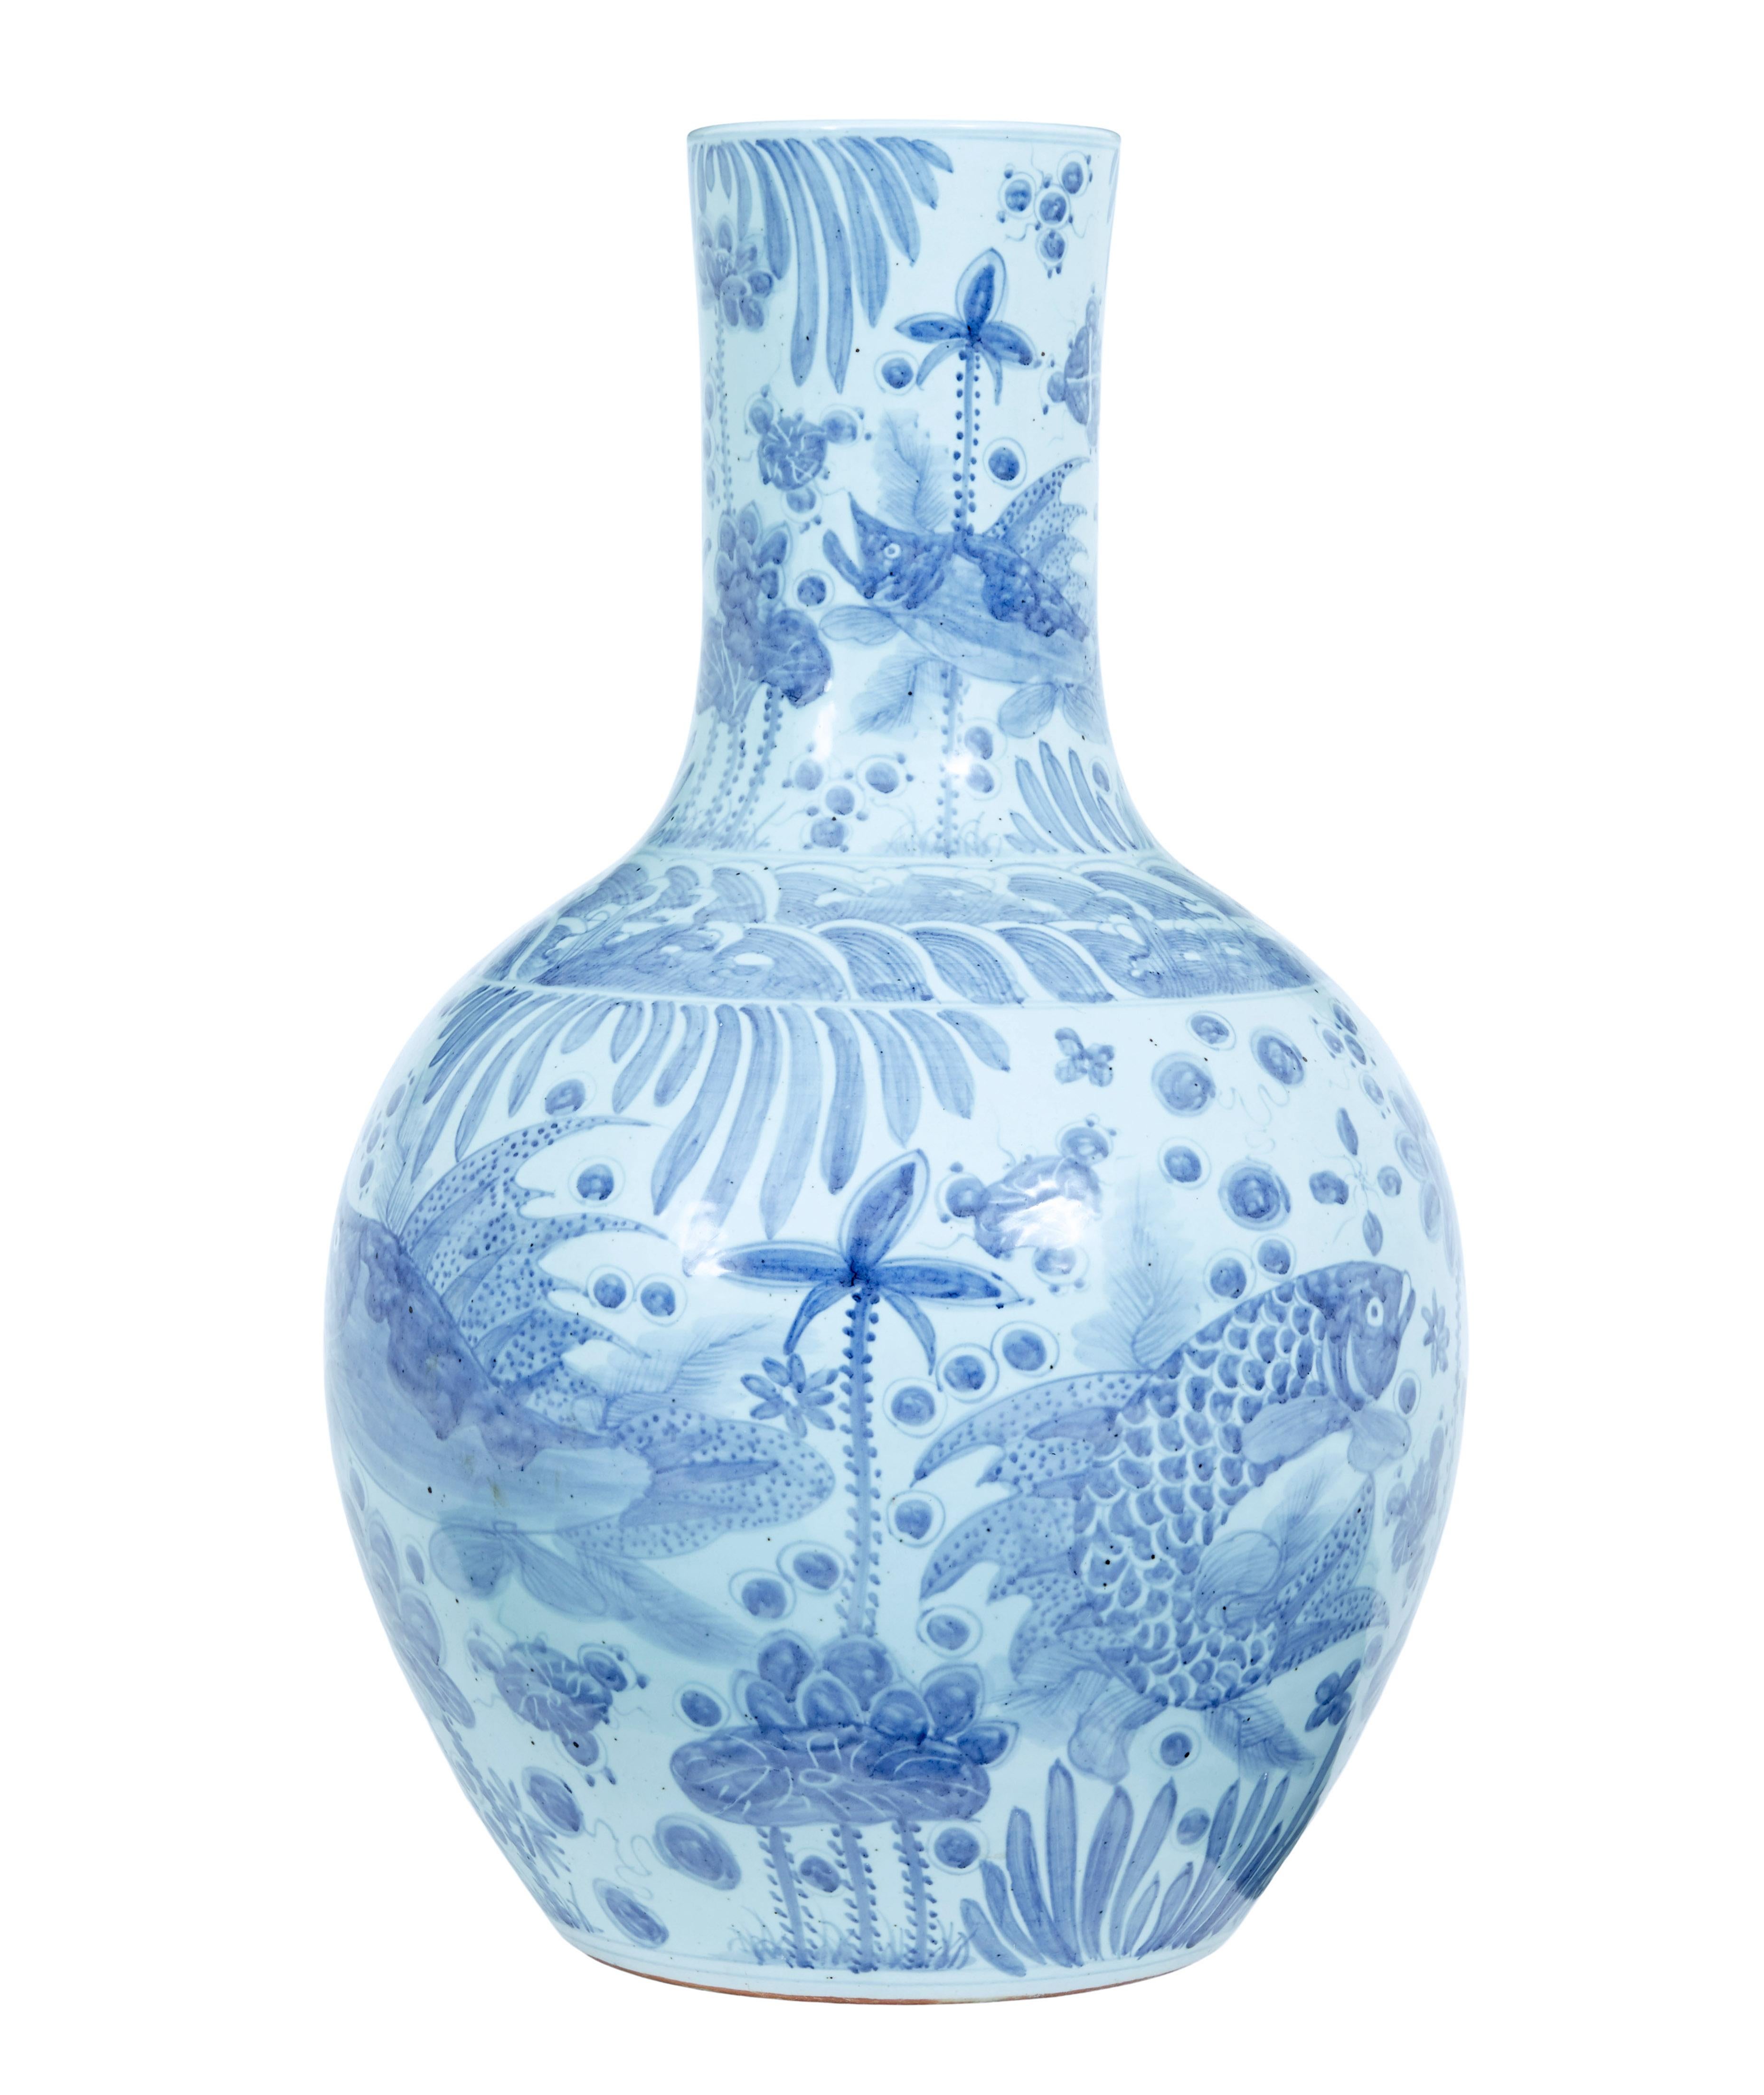 Hand-Crafted Large Decorative Blue and White Ceramic Chinese Vase